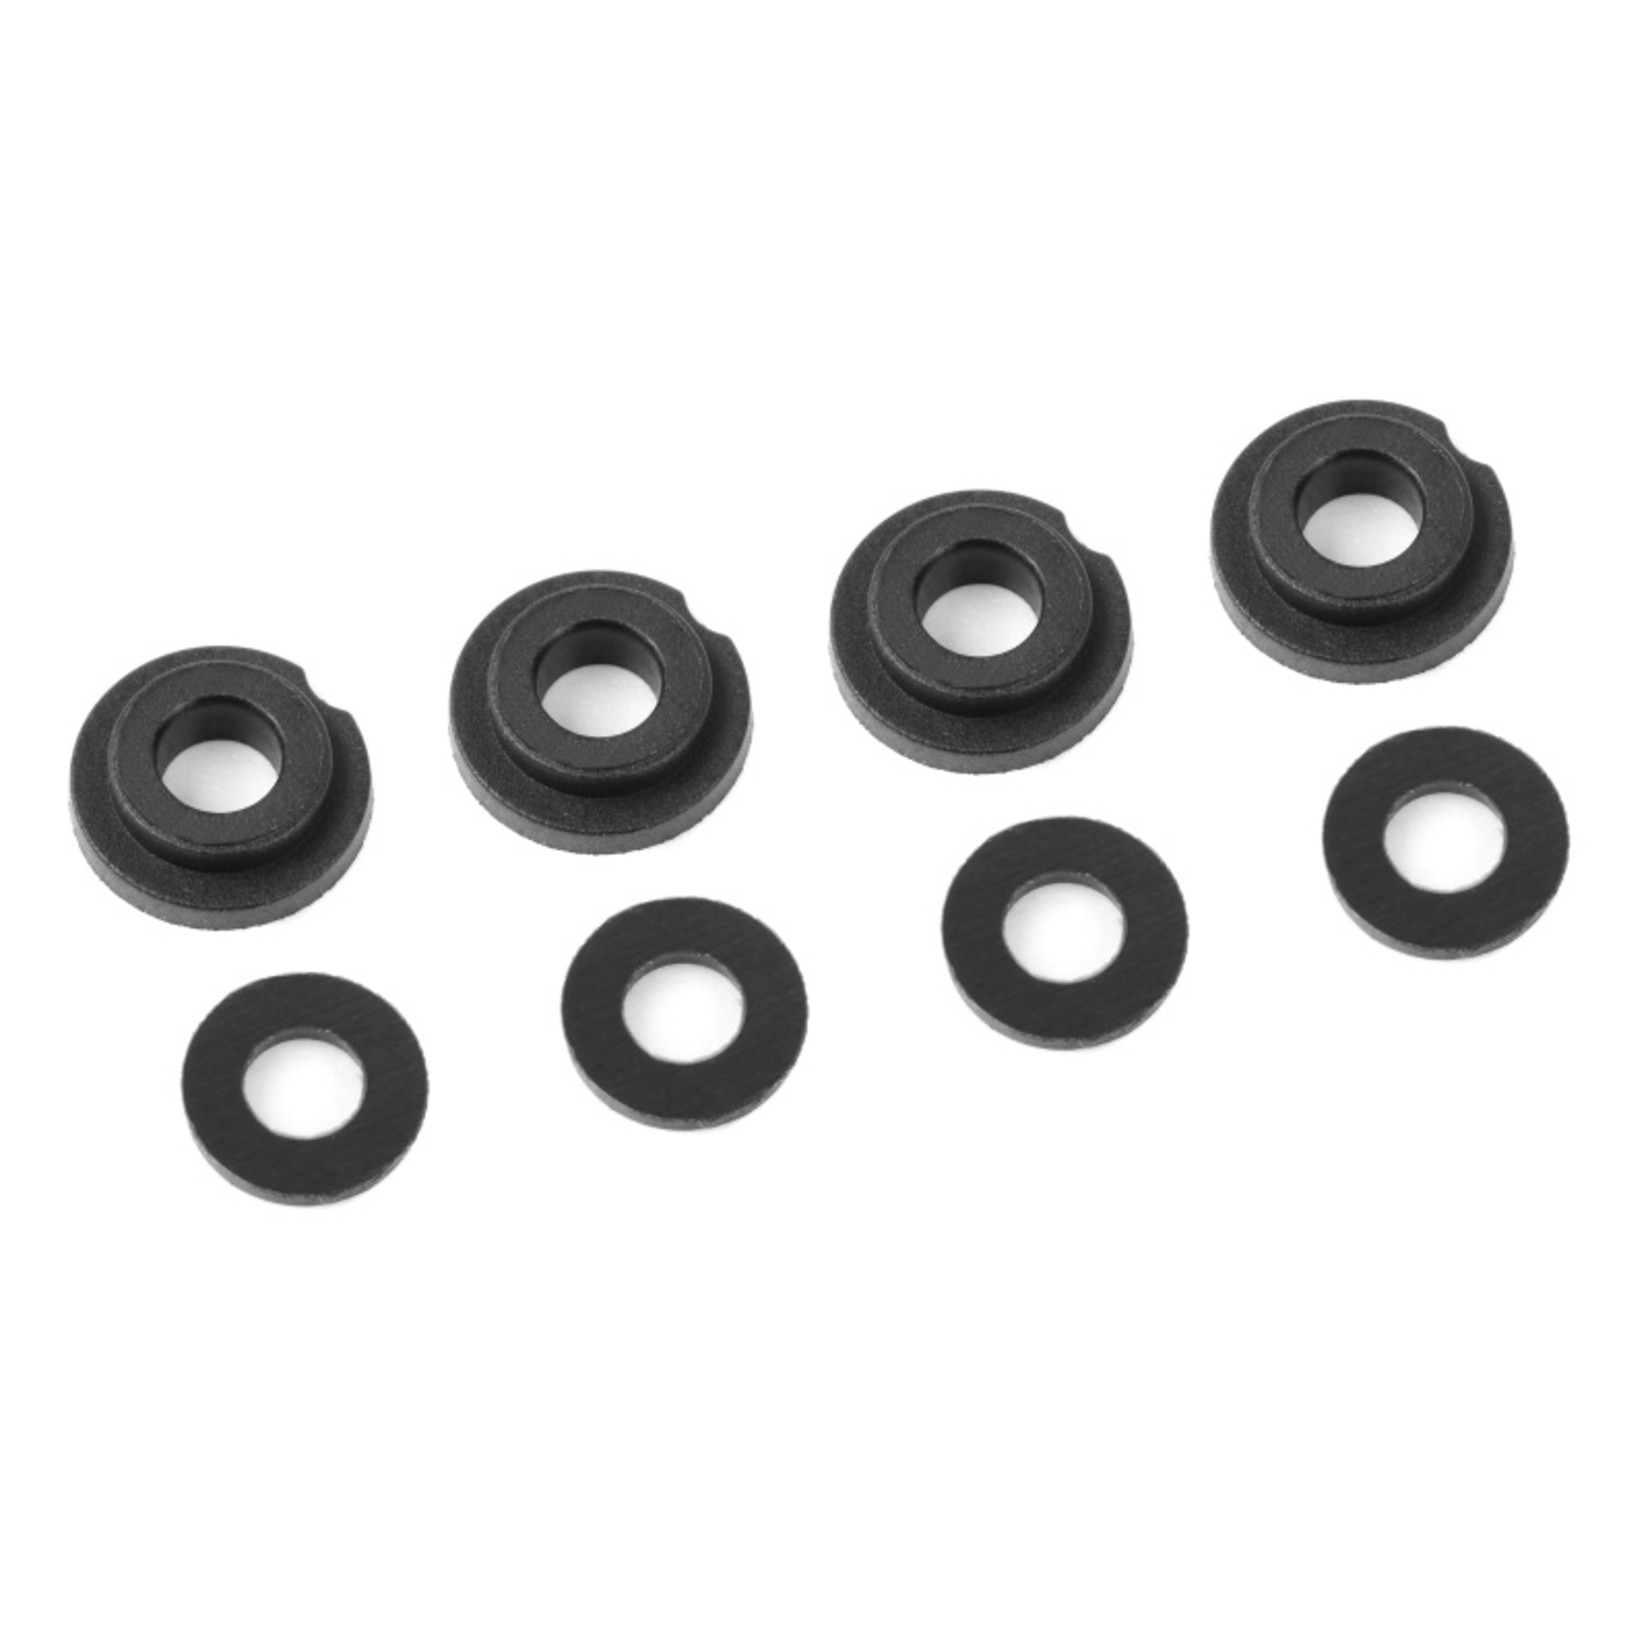 Corally (Team Corally) COR00180-078   Shock Body Insert - Washer - Composite - 1 set (4+4pcs):